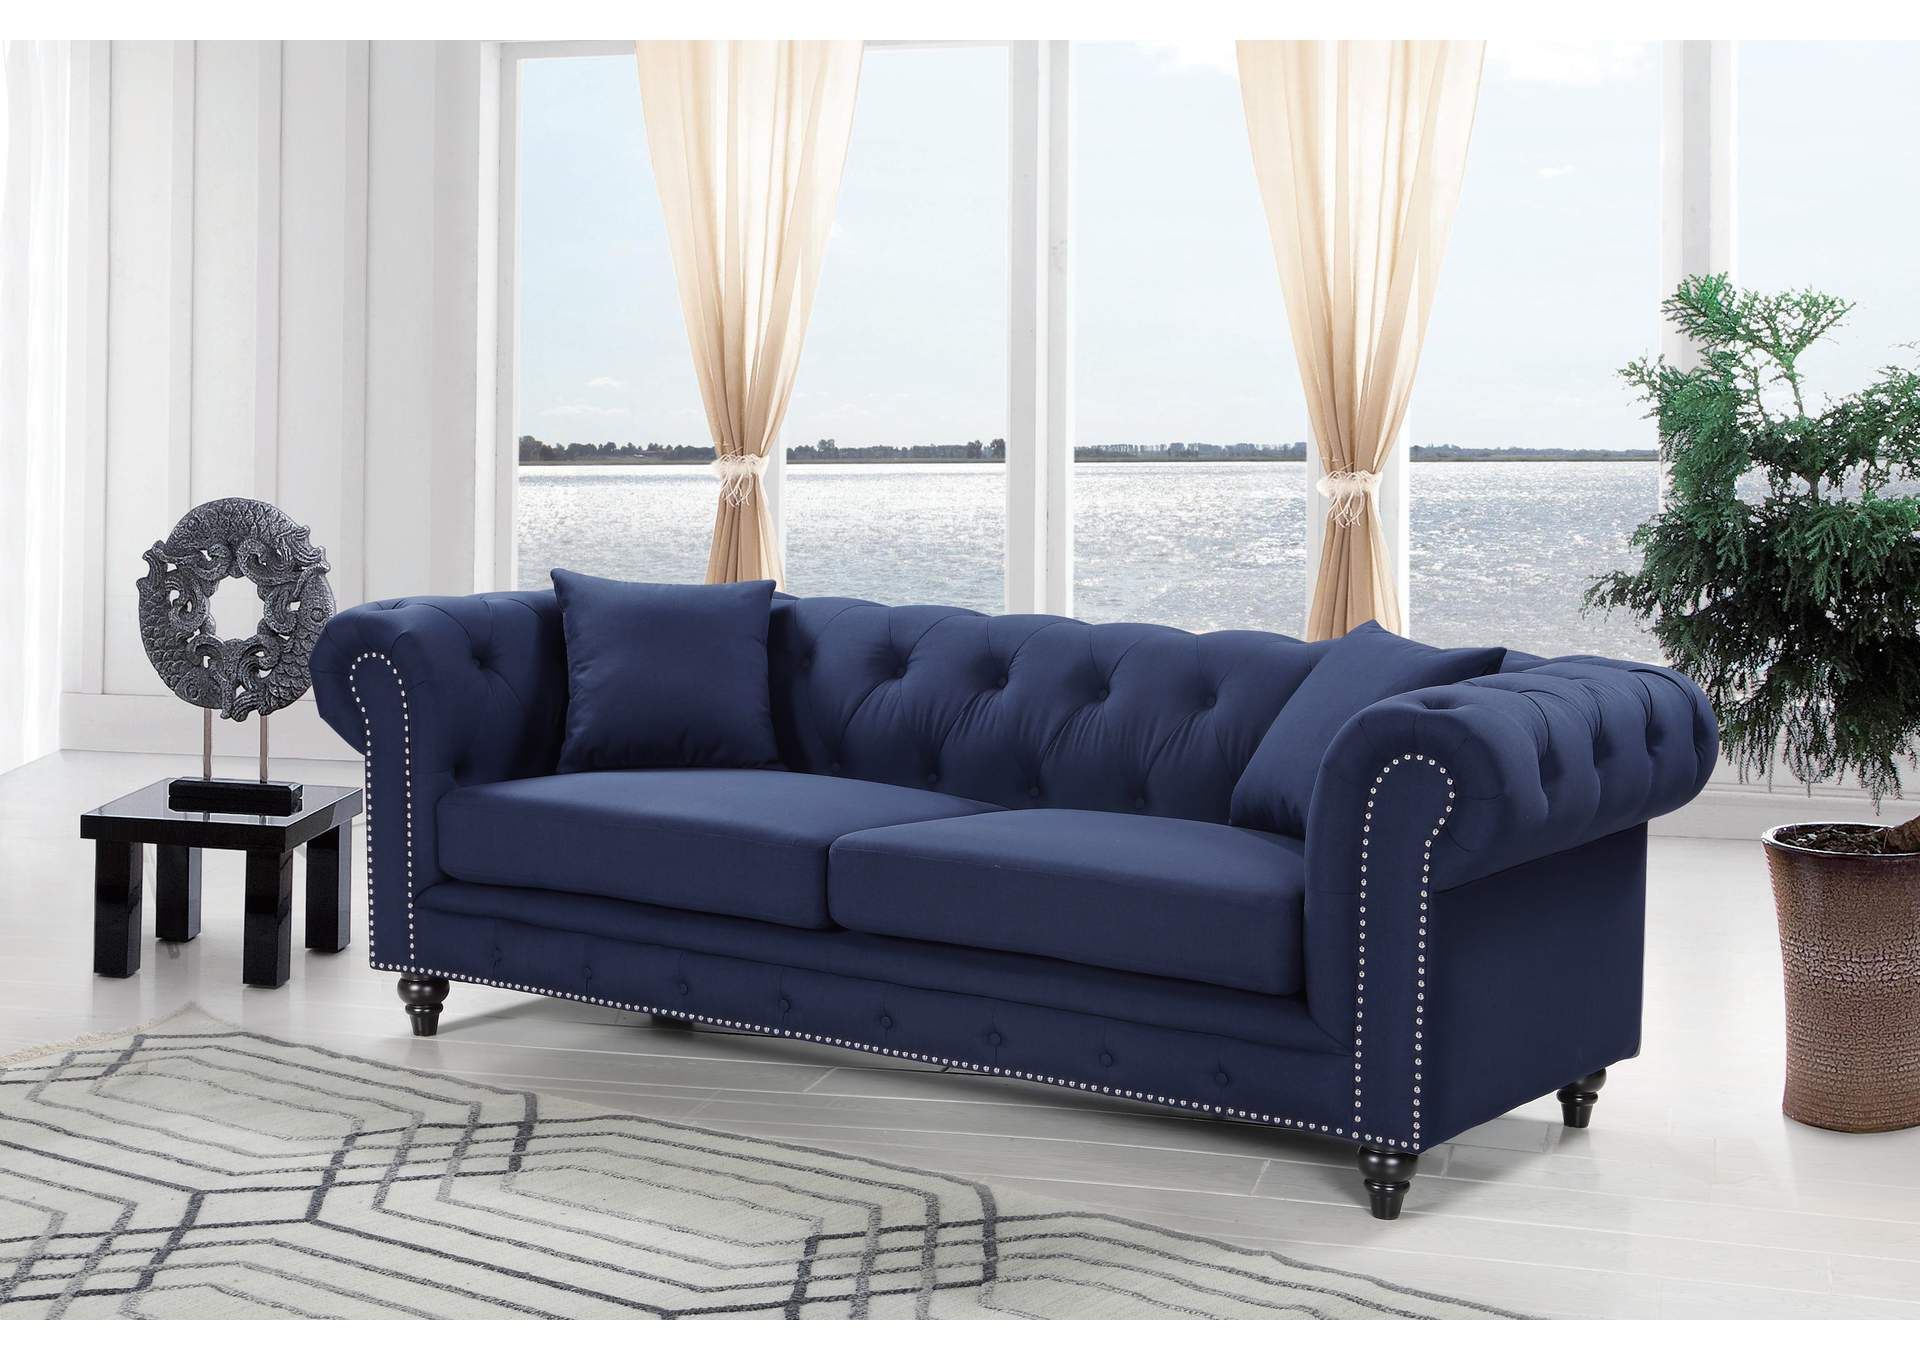 Chesterfield Navy Linen Sofa Best Buy Furniture And Mattress For Most Popular Navy Linen Coil Sofas (View 4 of 15)